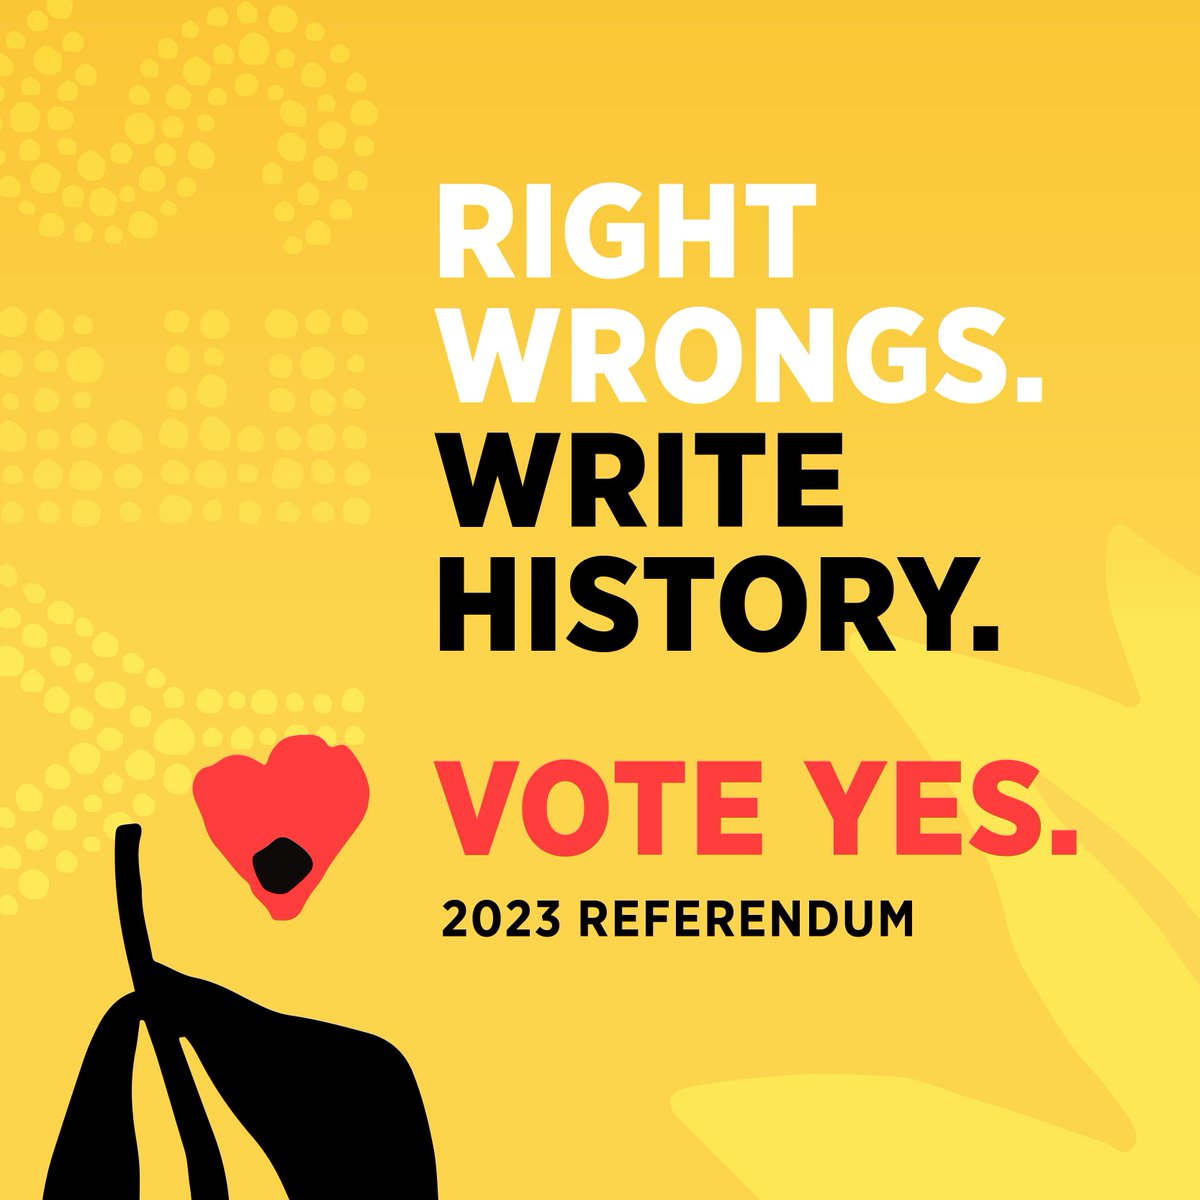 This year Australians will vote on an Indigenous Voice to Parliament—and I’ll be proudly voting Yes.
Let's right wrongs, write history and vote Yes.
#VoteYesAustralia
#Yes23 #VoiceToParliament
#YesUluru #UluruStatement #Uluru